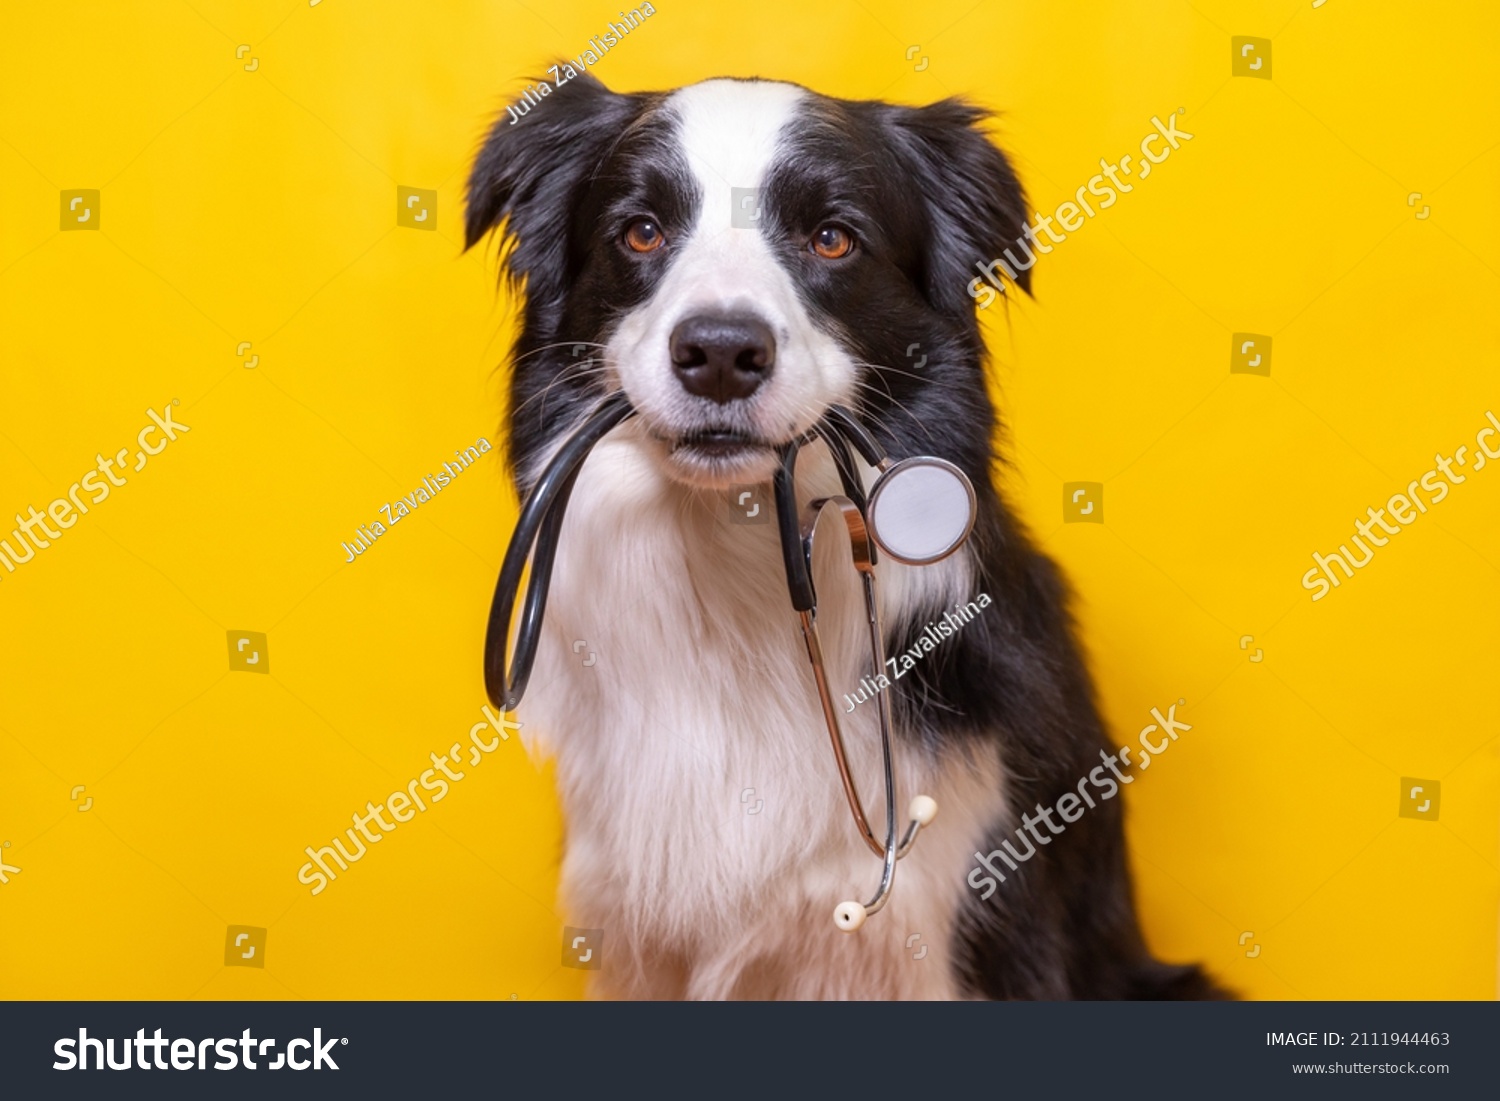 Puppy dog border collie holding stethoscope in mouth isolated on yellow background. Purebred pet dog on reception at veterinary doctor in vet clinic. Pet health care and animals concept #2111944463